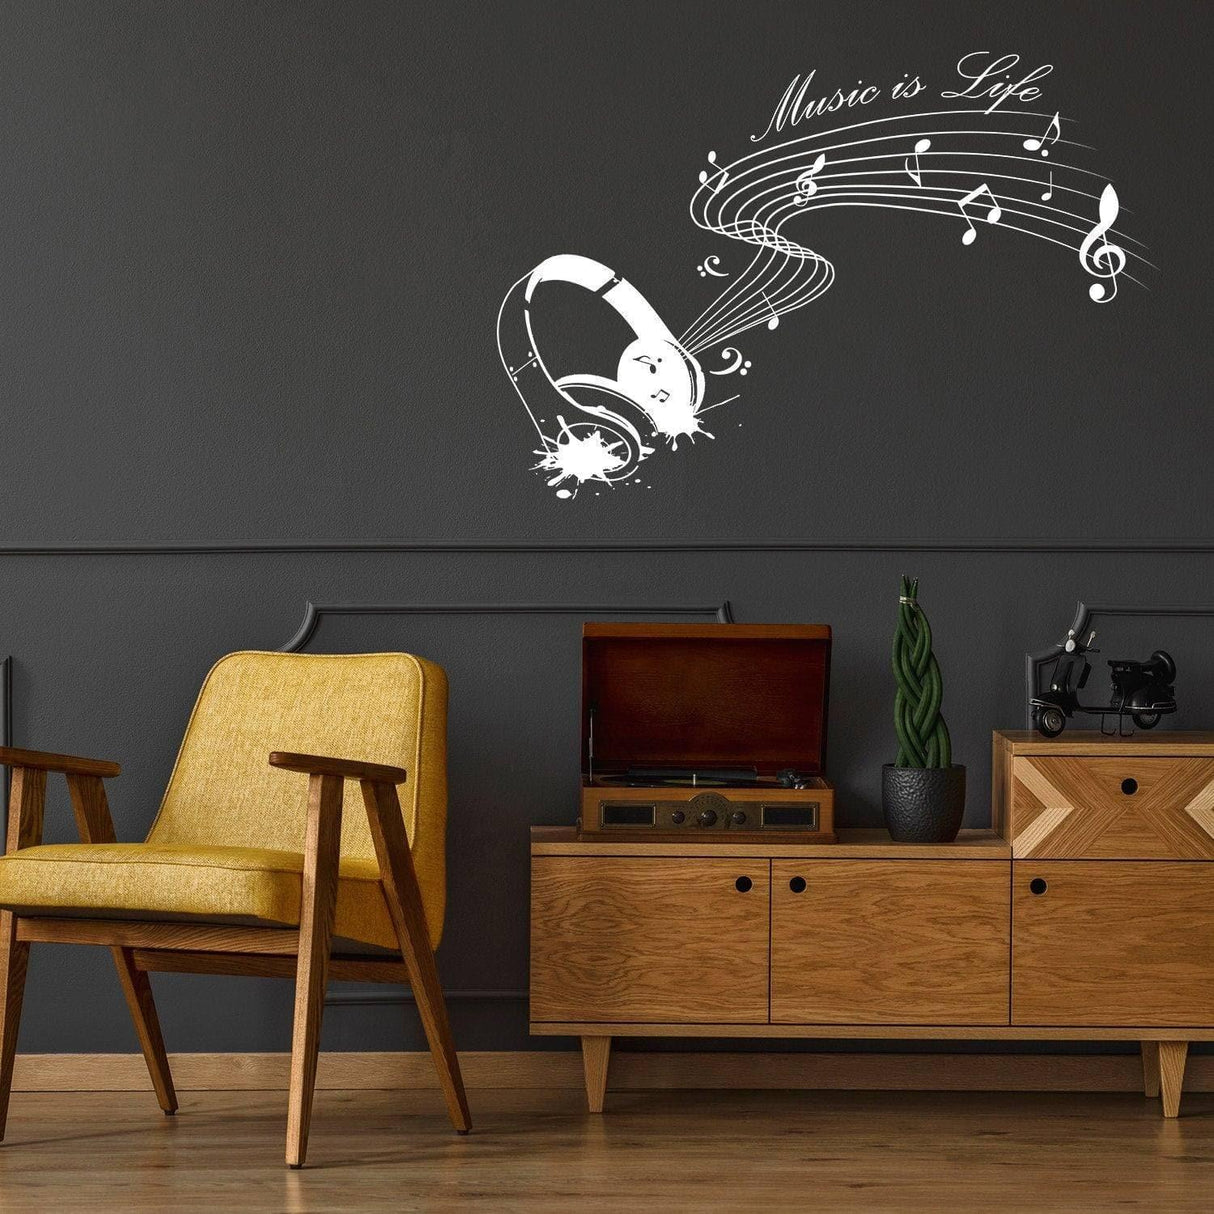 Music Is Life Wall Sticker - Note Quote Gift Decor Art Vinyl Decal - Dj Room Festival Love Event Earphone Saying Sign Stick Mural - Decords